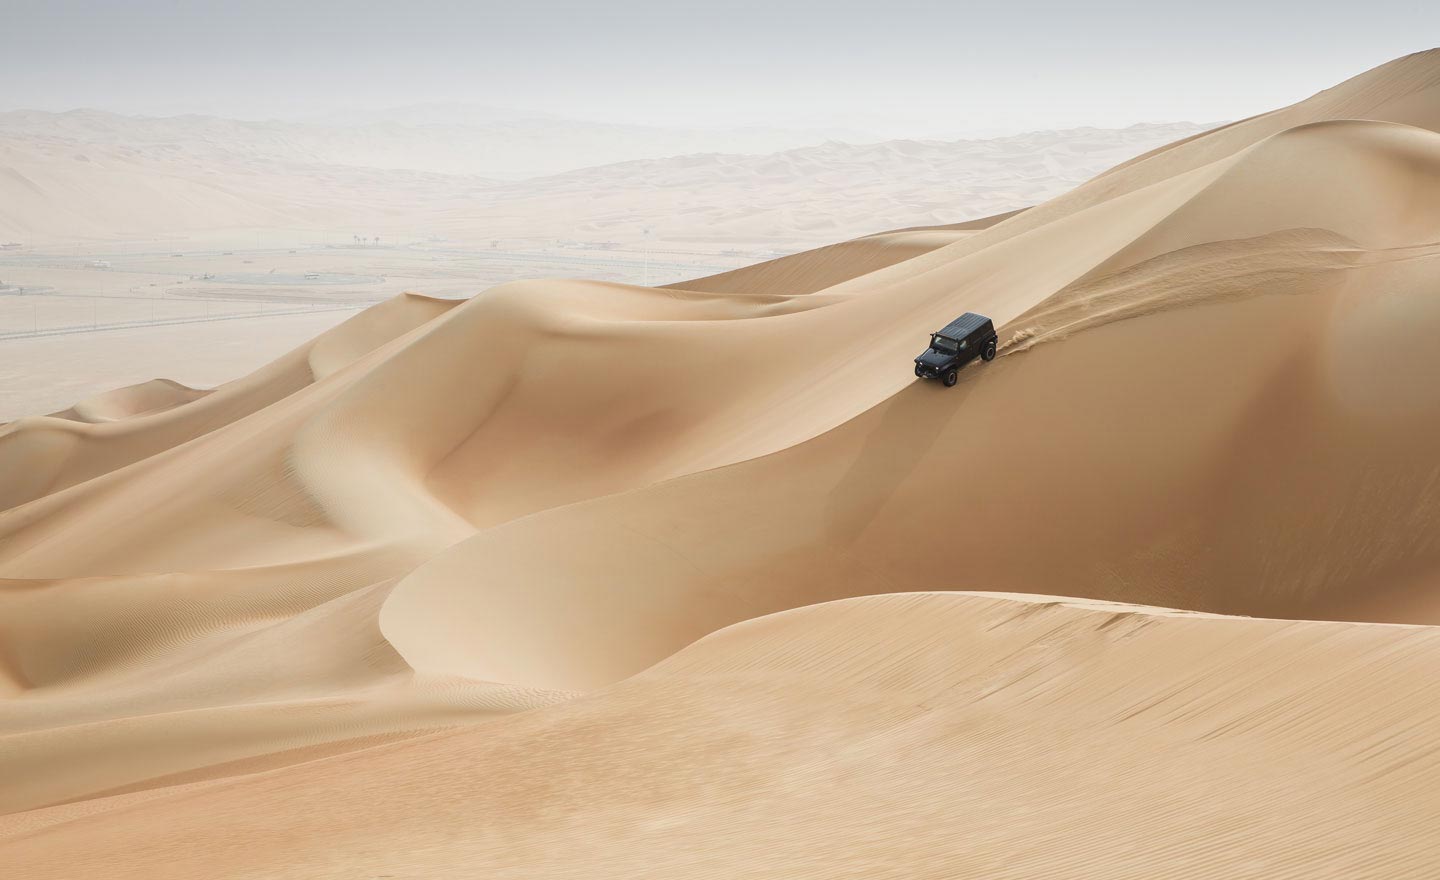 OFF-ROAD DRIVING TIPS FOR A 4X4 DESERT ADVENTURE